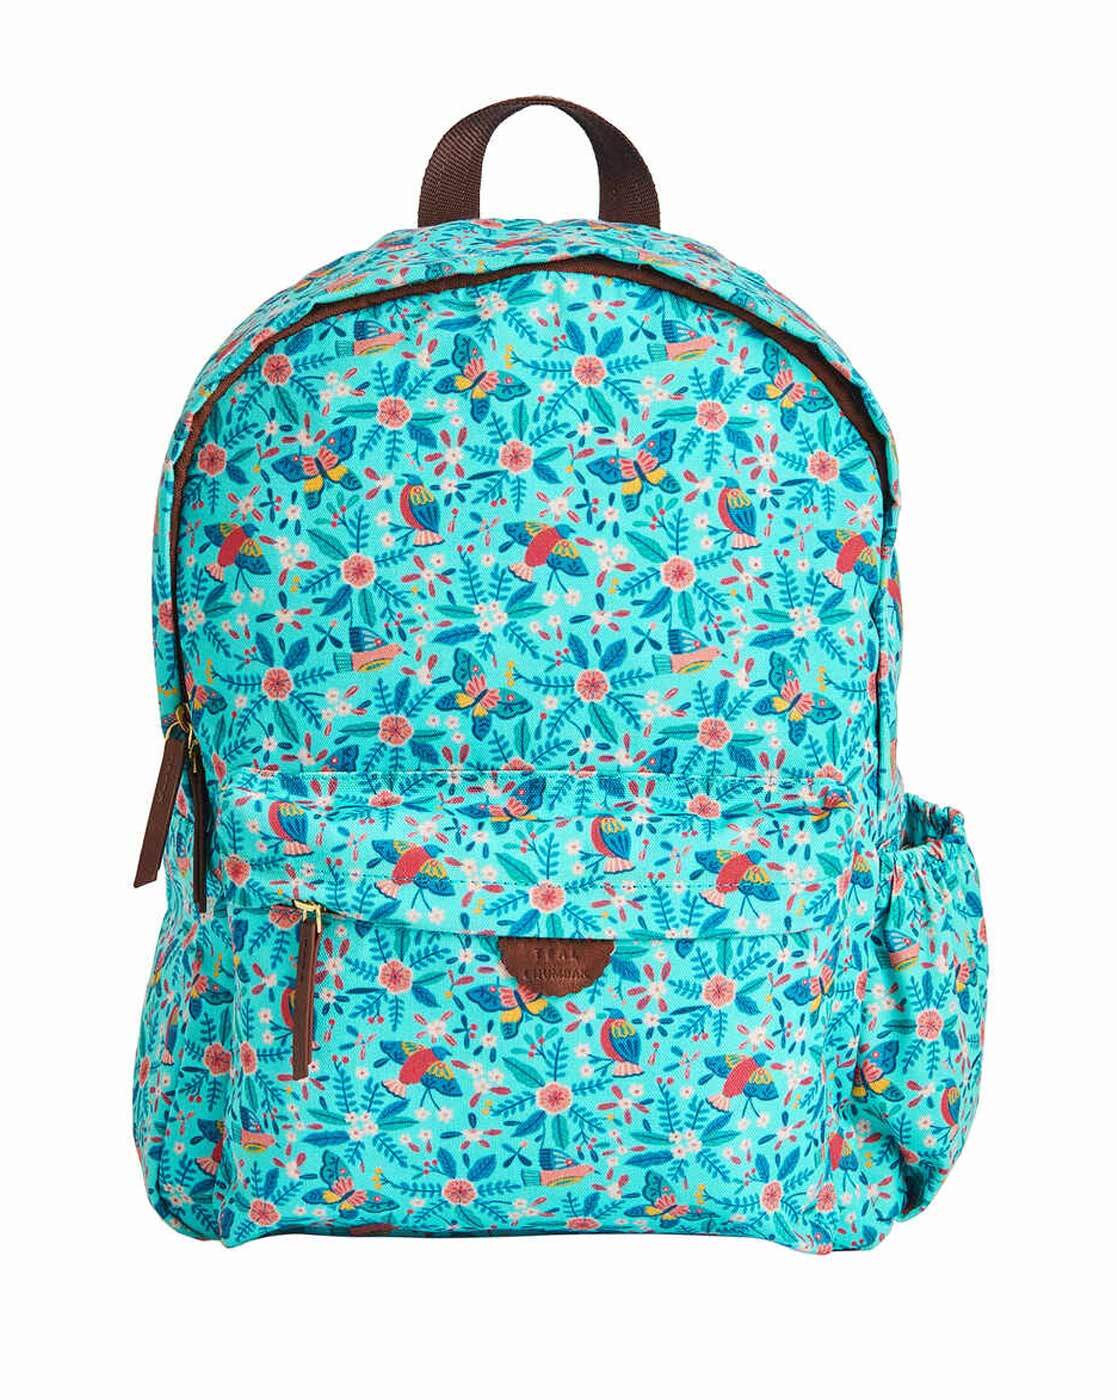 ALAZA Red Rose Flower Floral Backpack Purse for Women Anti Theft Fashion  Back Pack Shoulder Bag : Clothing, Shoes & Jewelry - Amazon.com